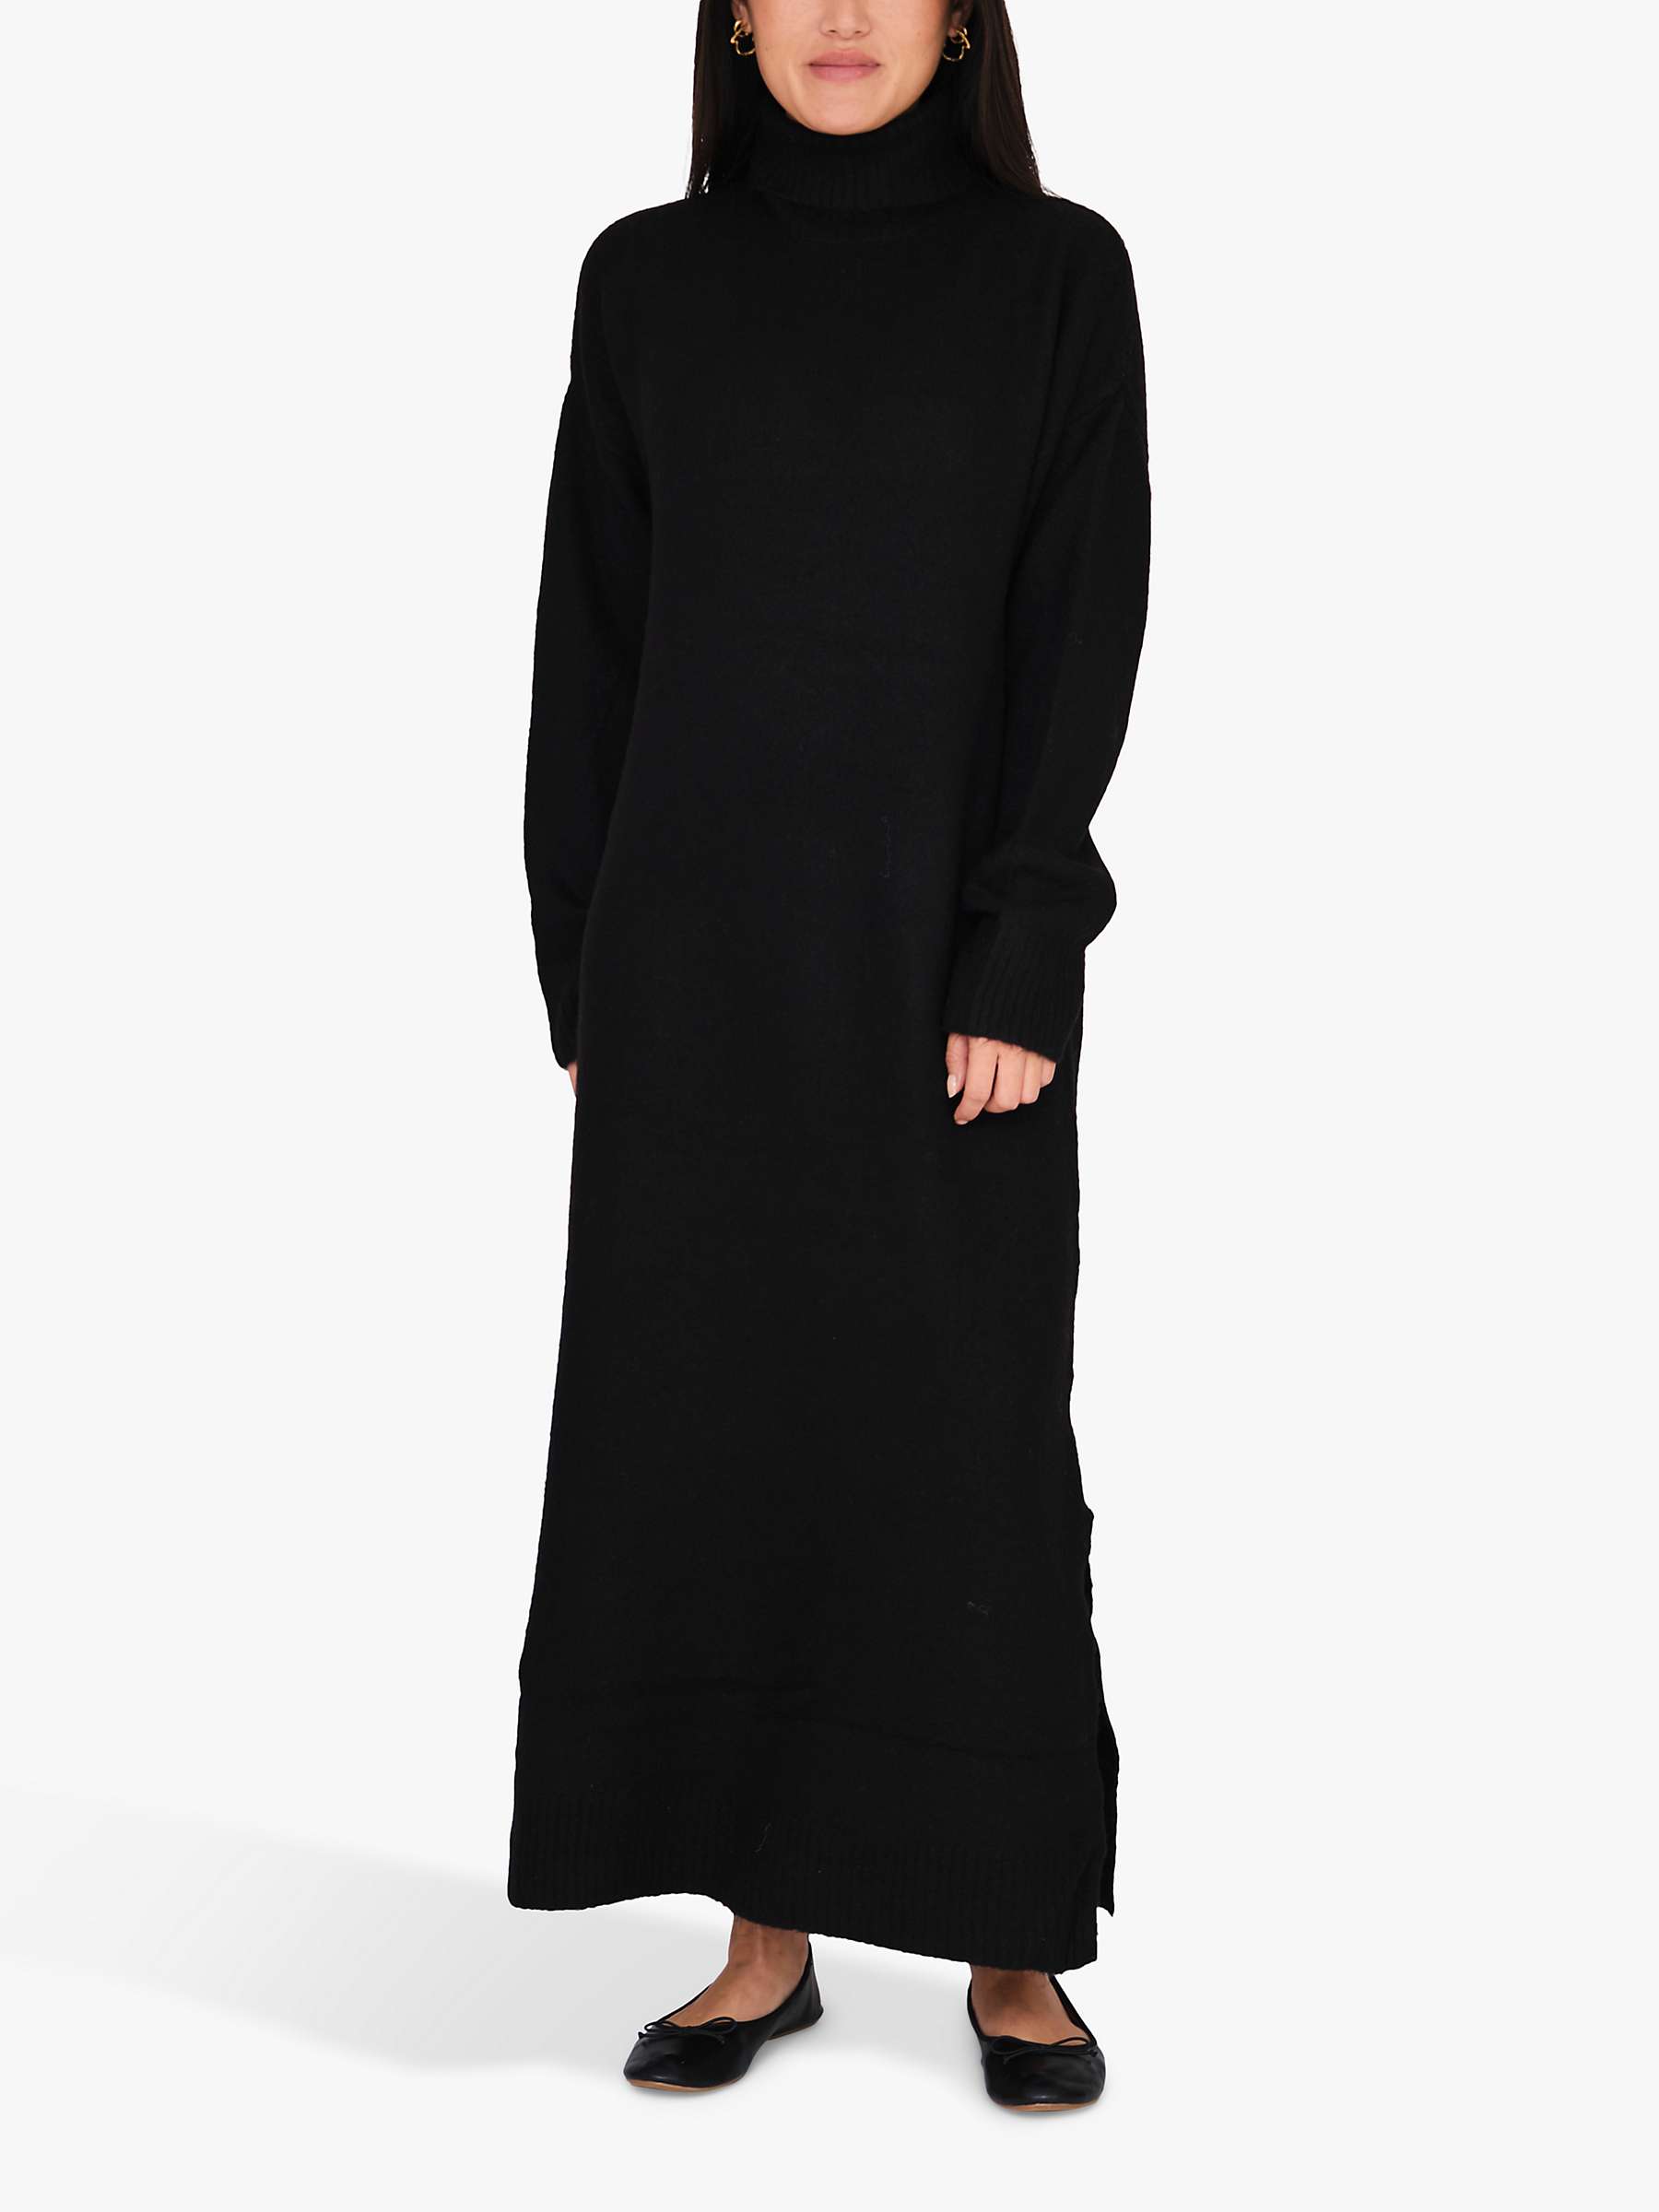 Buy A-VIEW Penny Knit Wool Blend Jumper Dress Online at johnlewis.com